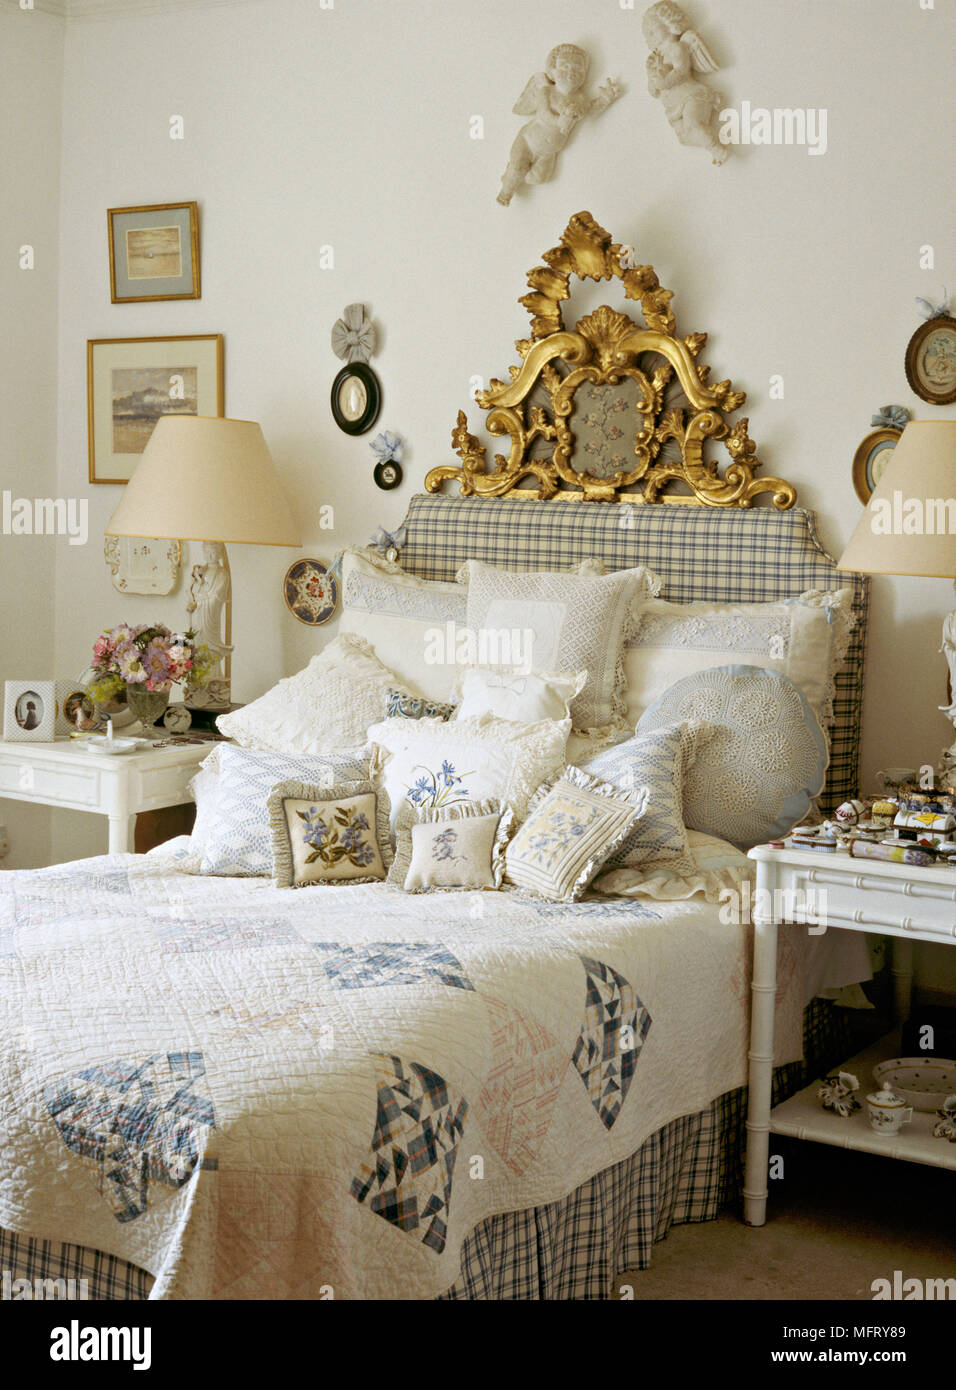 Ornate Headboard High Resolution Stock Photography and Images - Alamy